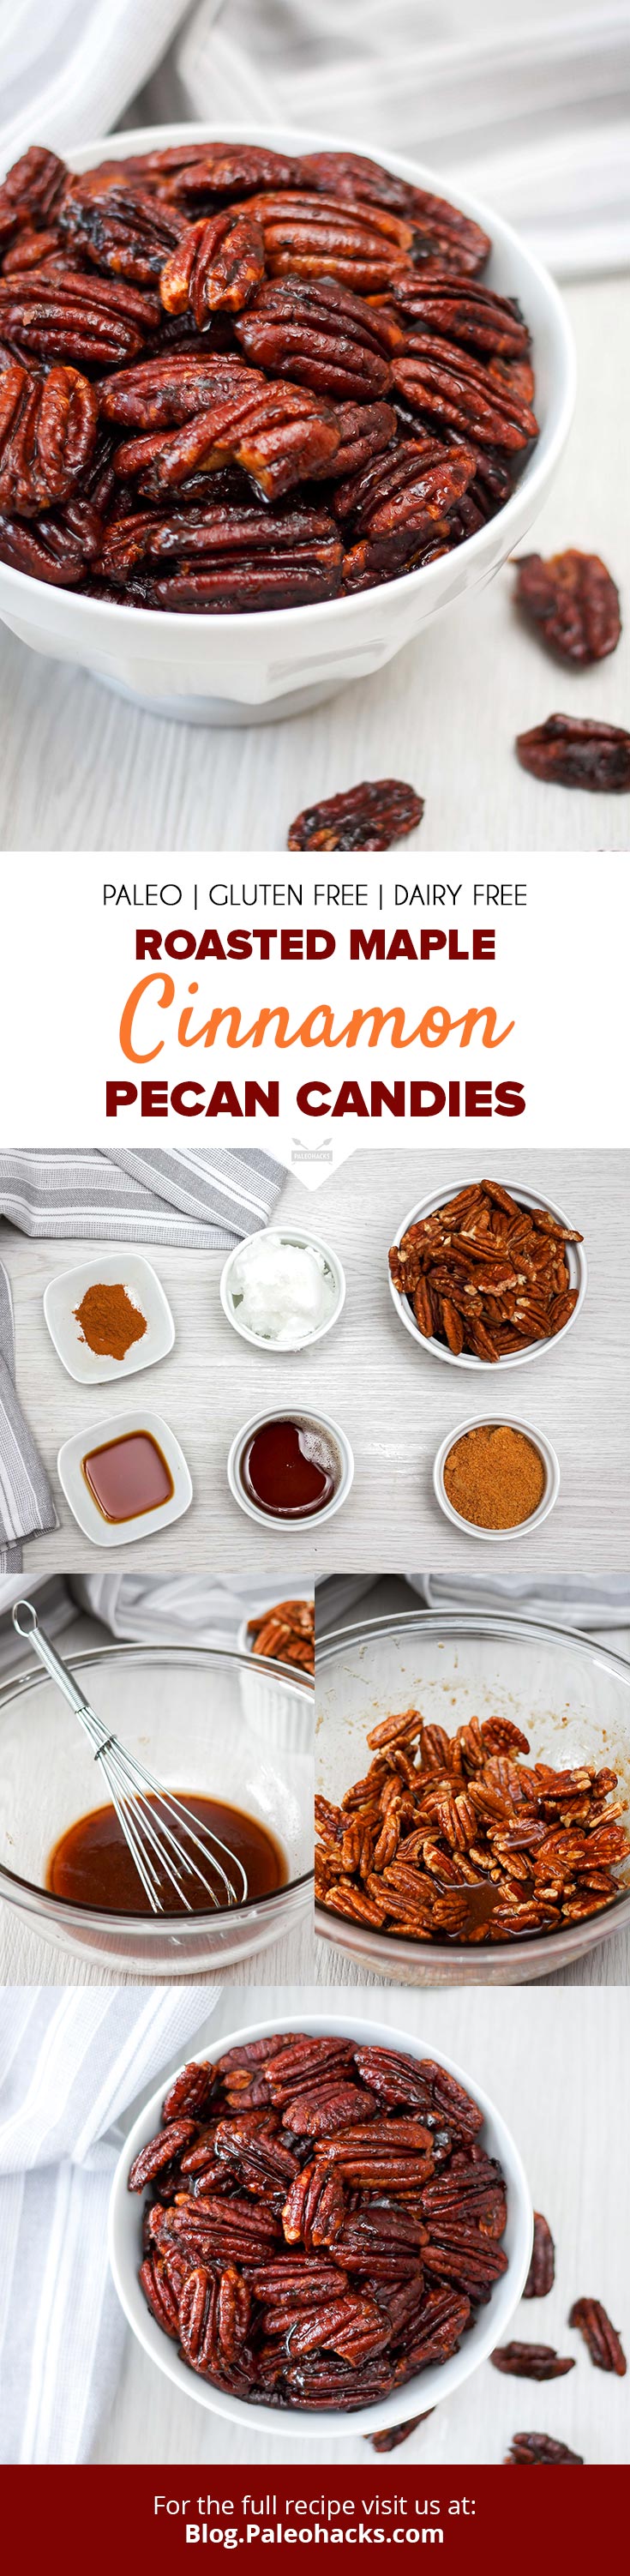 Don’t wait for pie season, enjoy these Roasted Maple Cinnamon Pecan Candies all year-round for a sweet and crunchy treat.